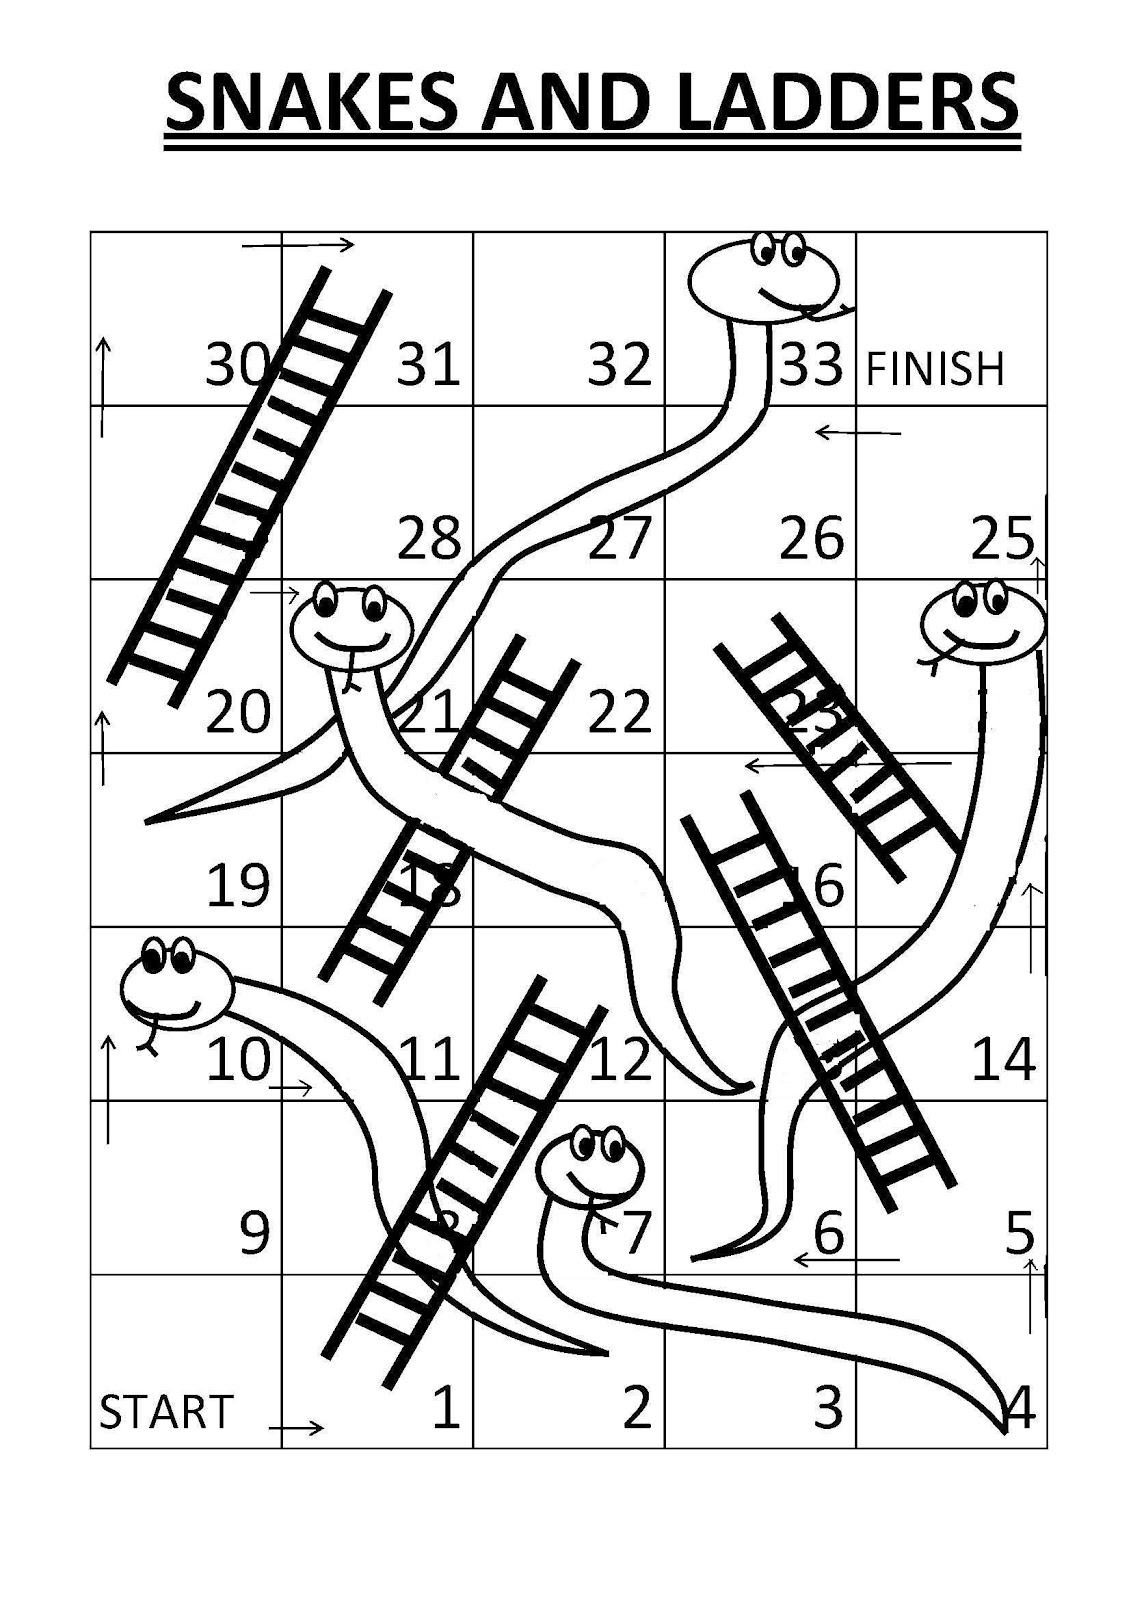 Snakes and Ladders Board Game ESL Image